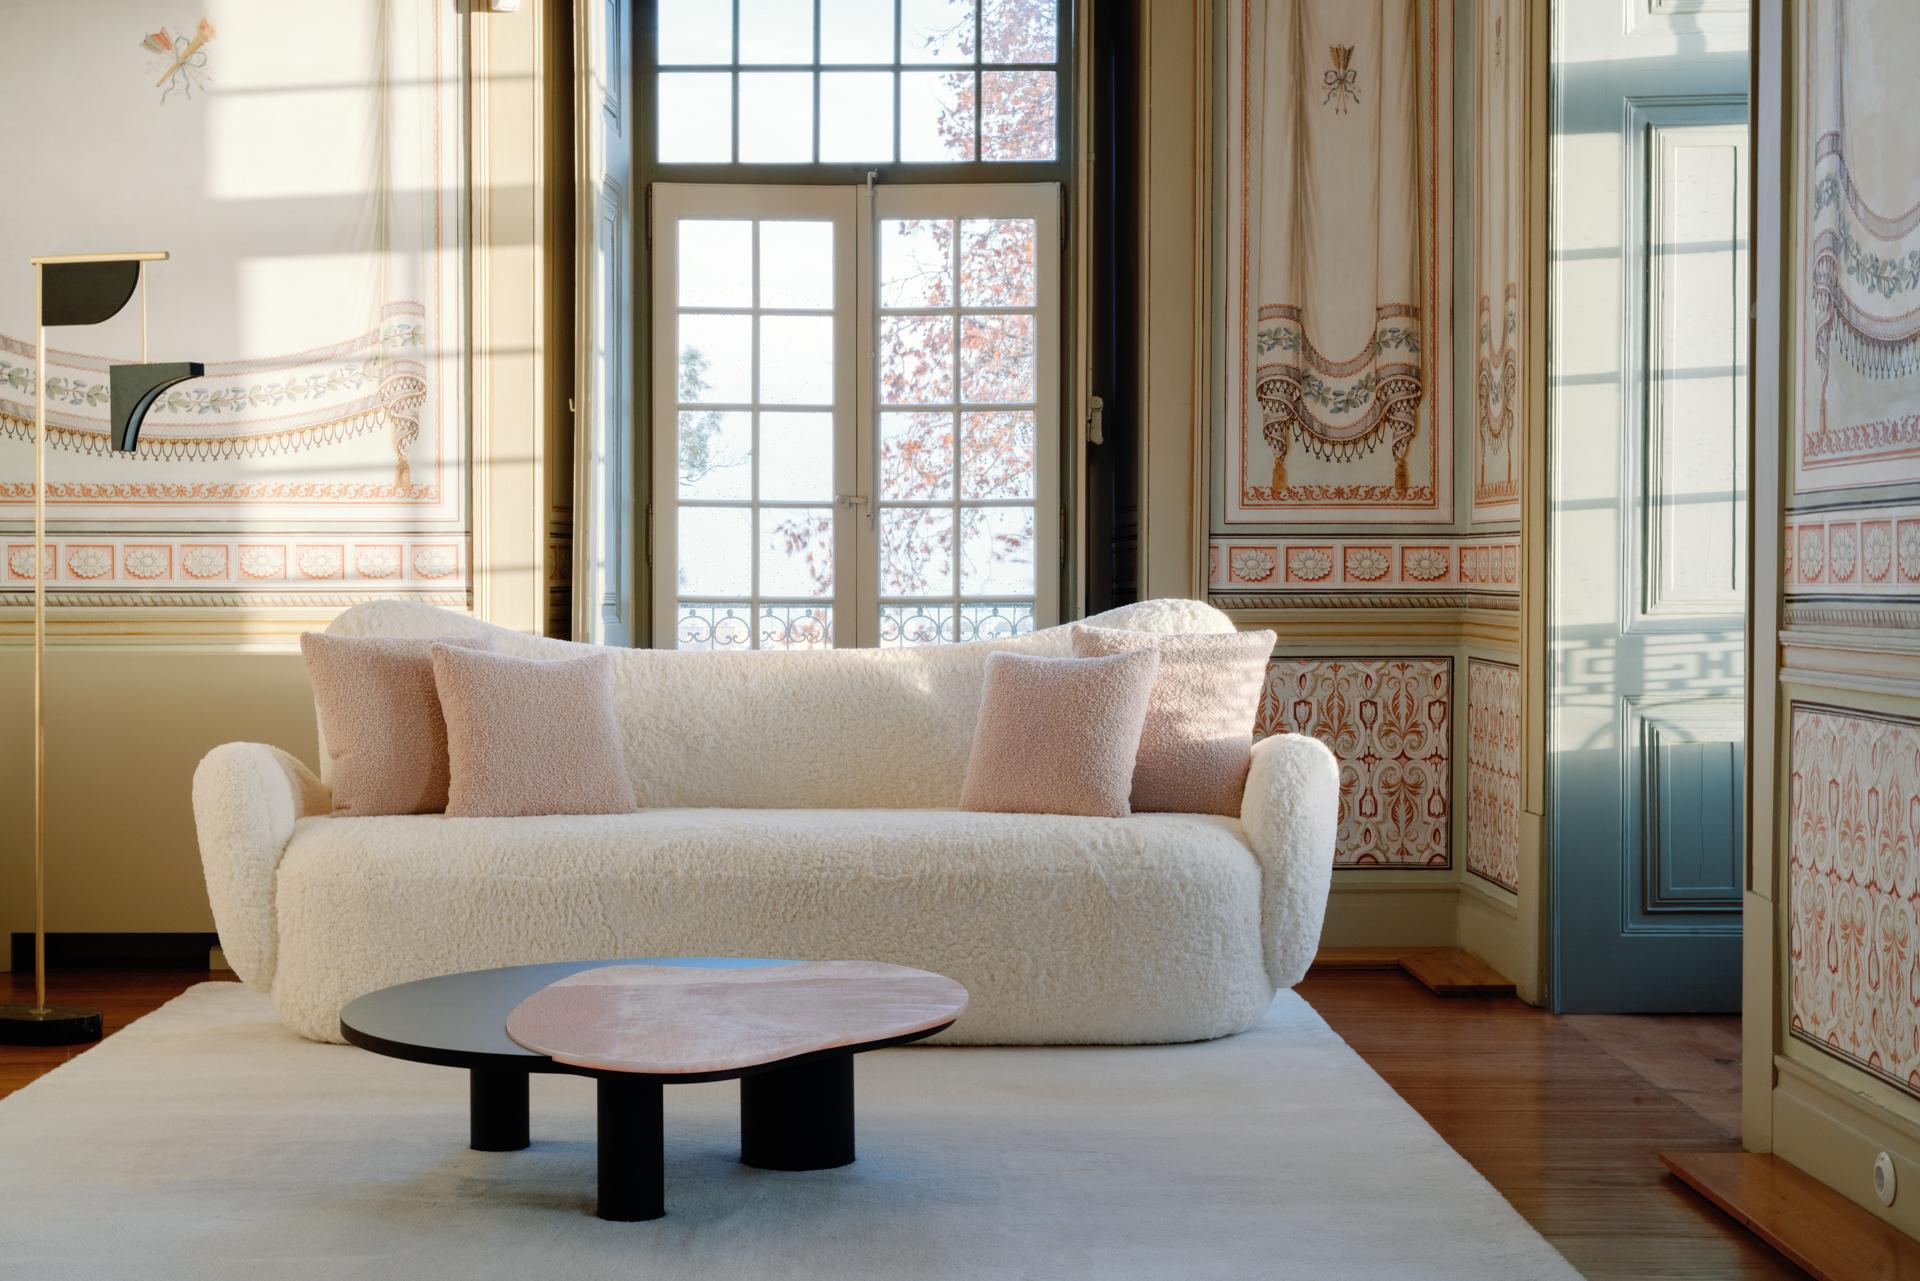 Conchula Sofa, Contemporary Collection, Handcrafted in Portugal - Europe by Greenapple.

Designed by Rute Martins for the Contemporary Collection, the Conchula curved sofa is a room-defining furniture piece with an eye-catching organic silhouette.